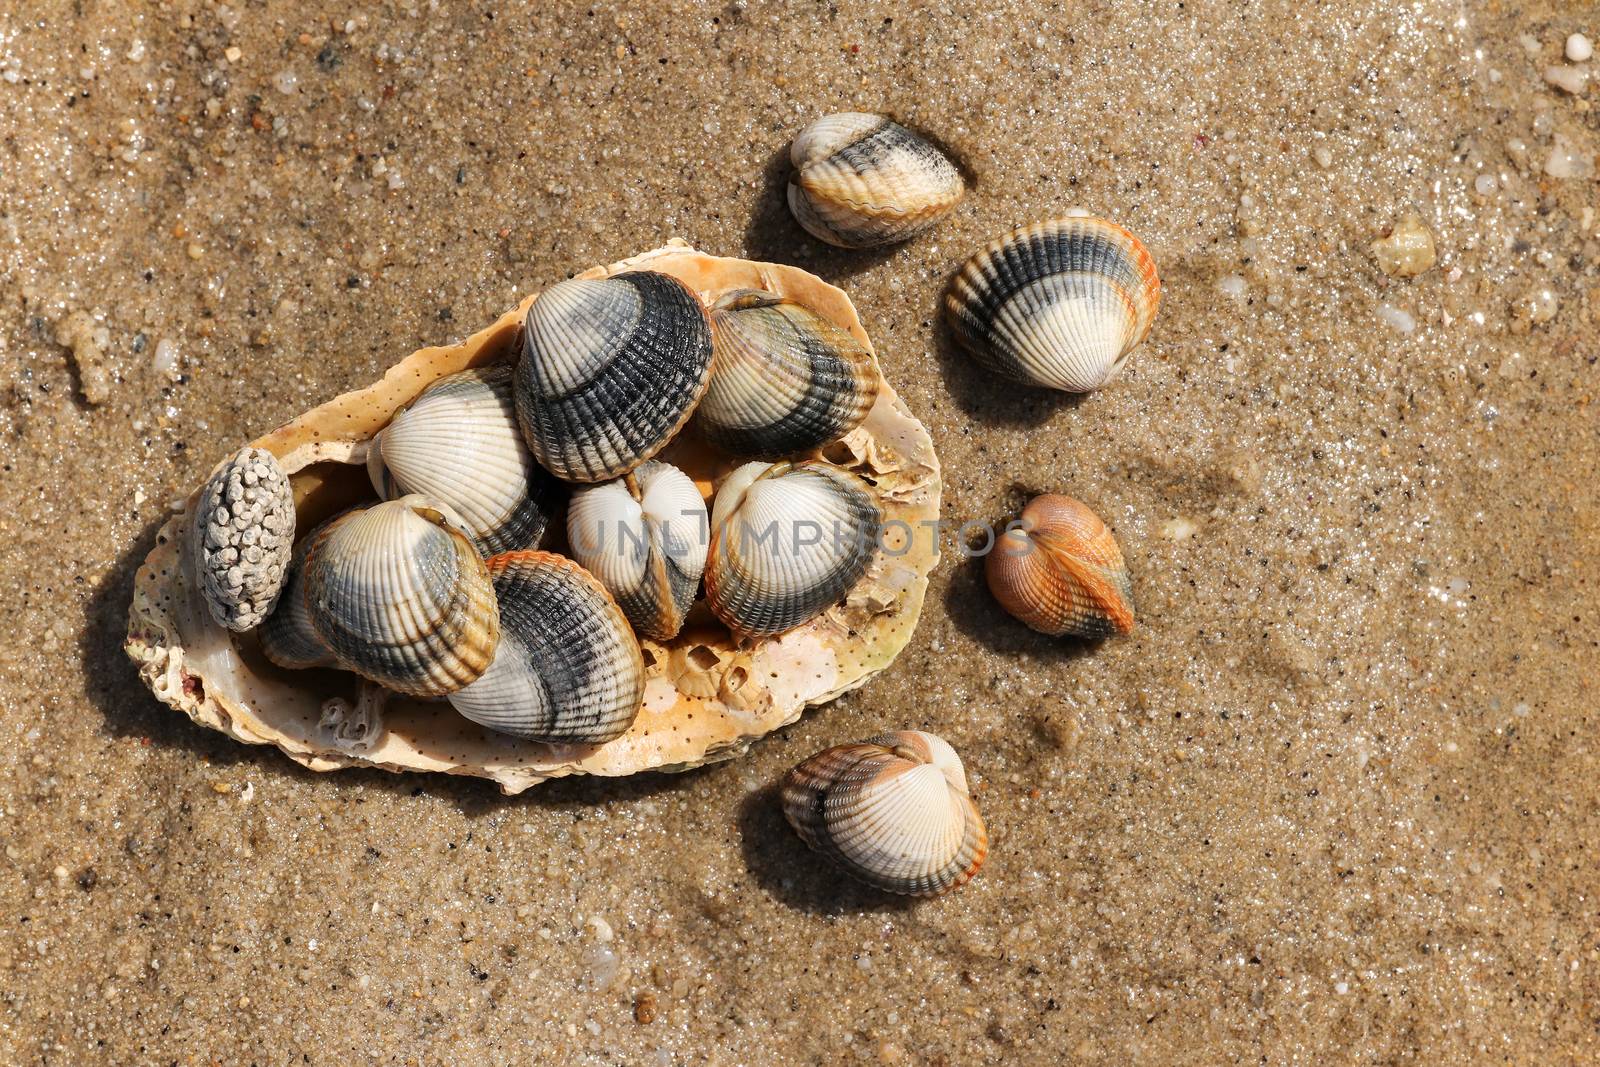 Common cockles on the sand - edible saltwater clams by Mibuch